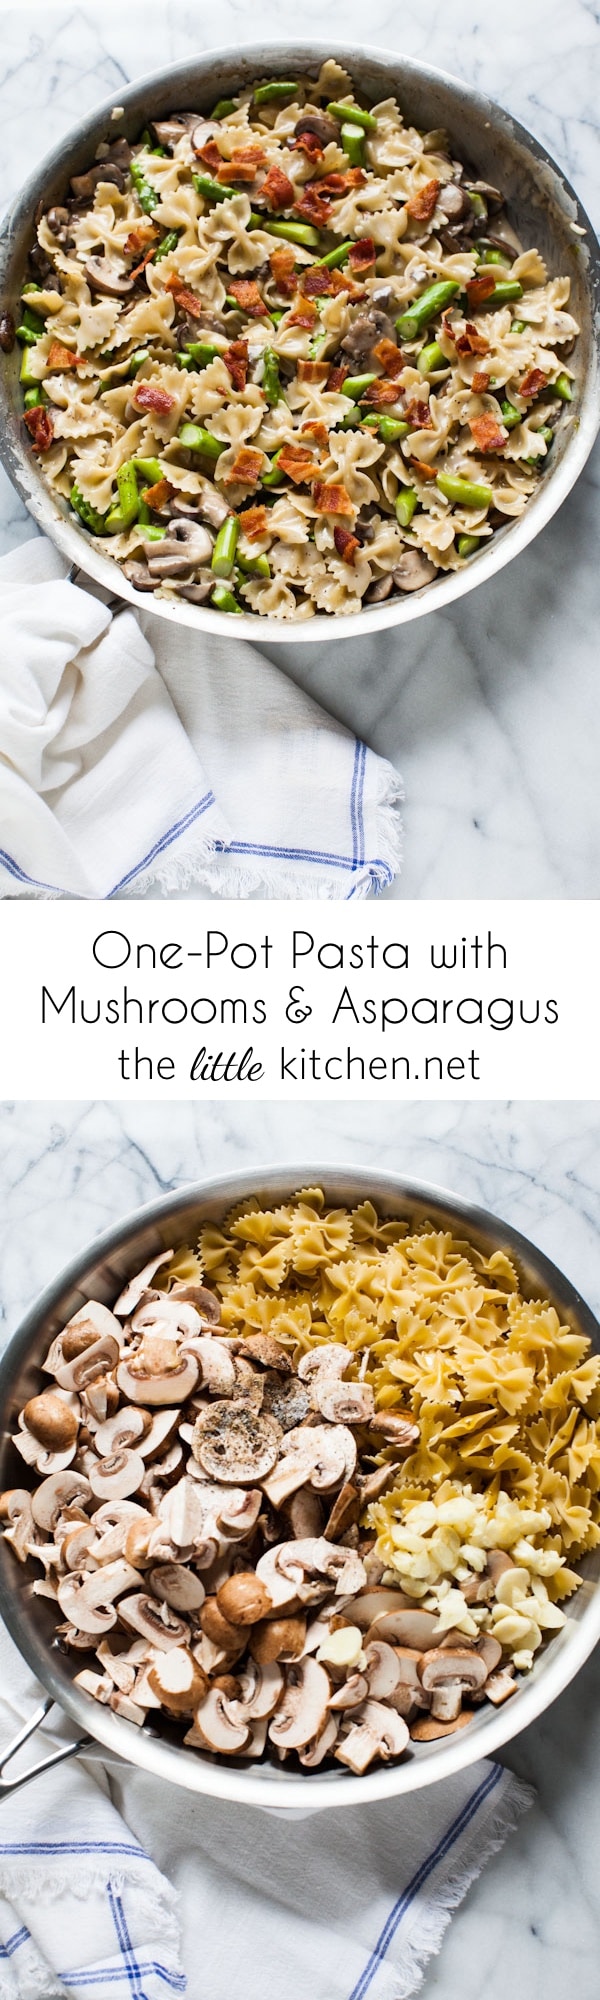 One-Pot Pasta with Mushroom Asparagus from thelittlekitchen.net